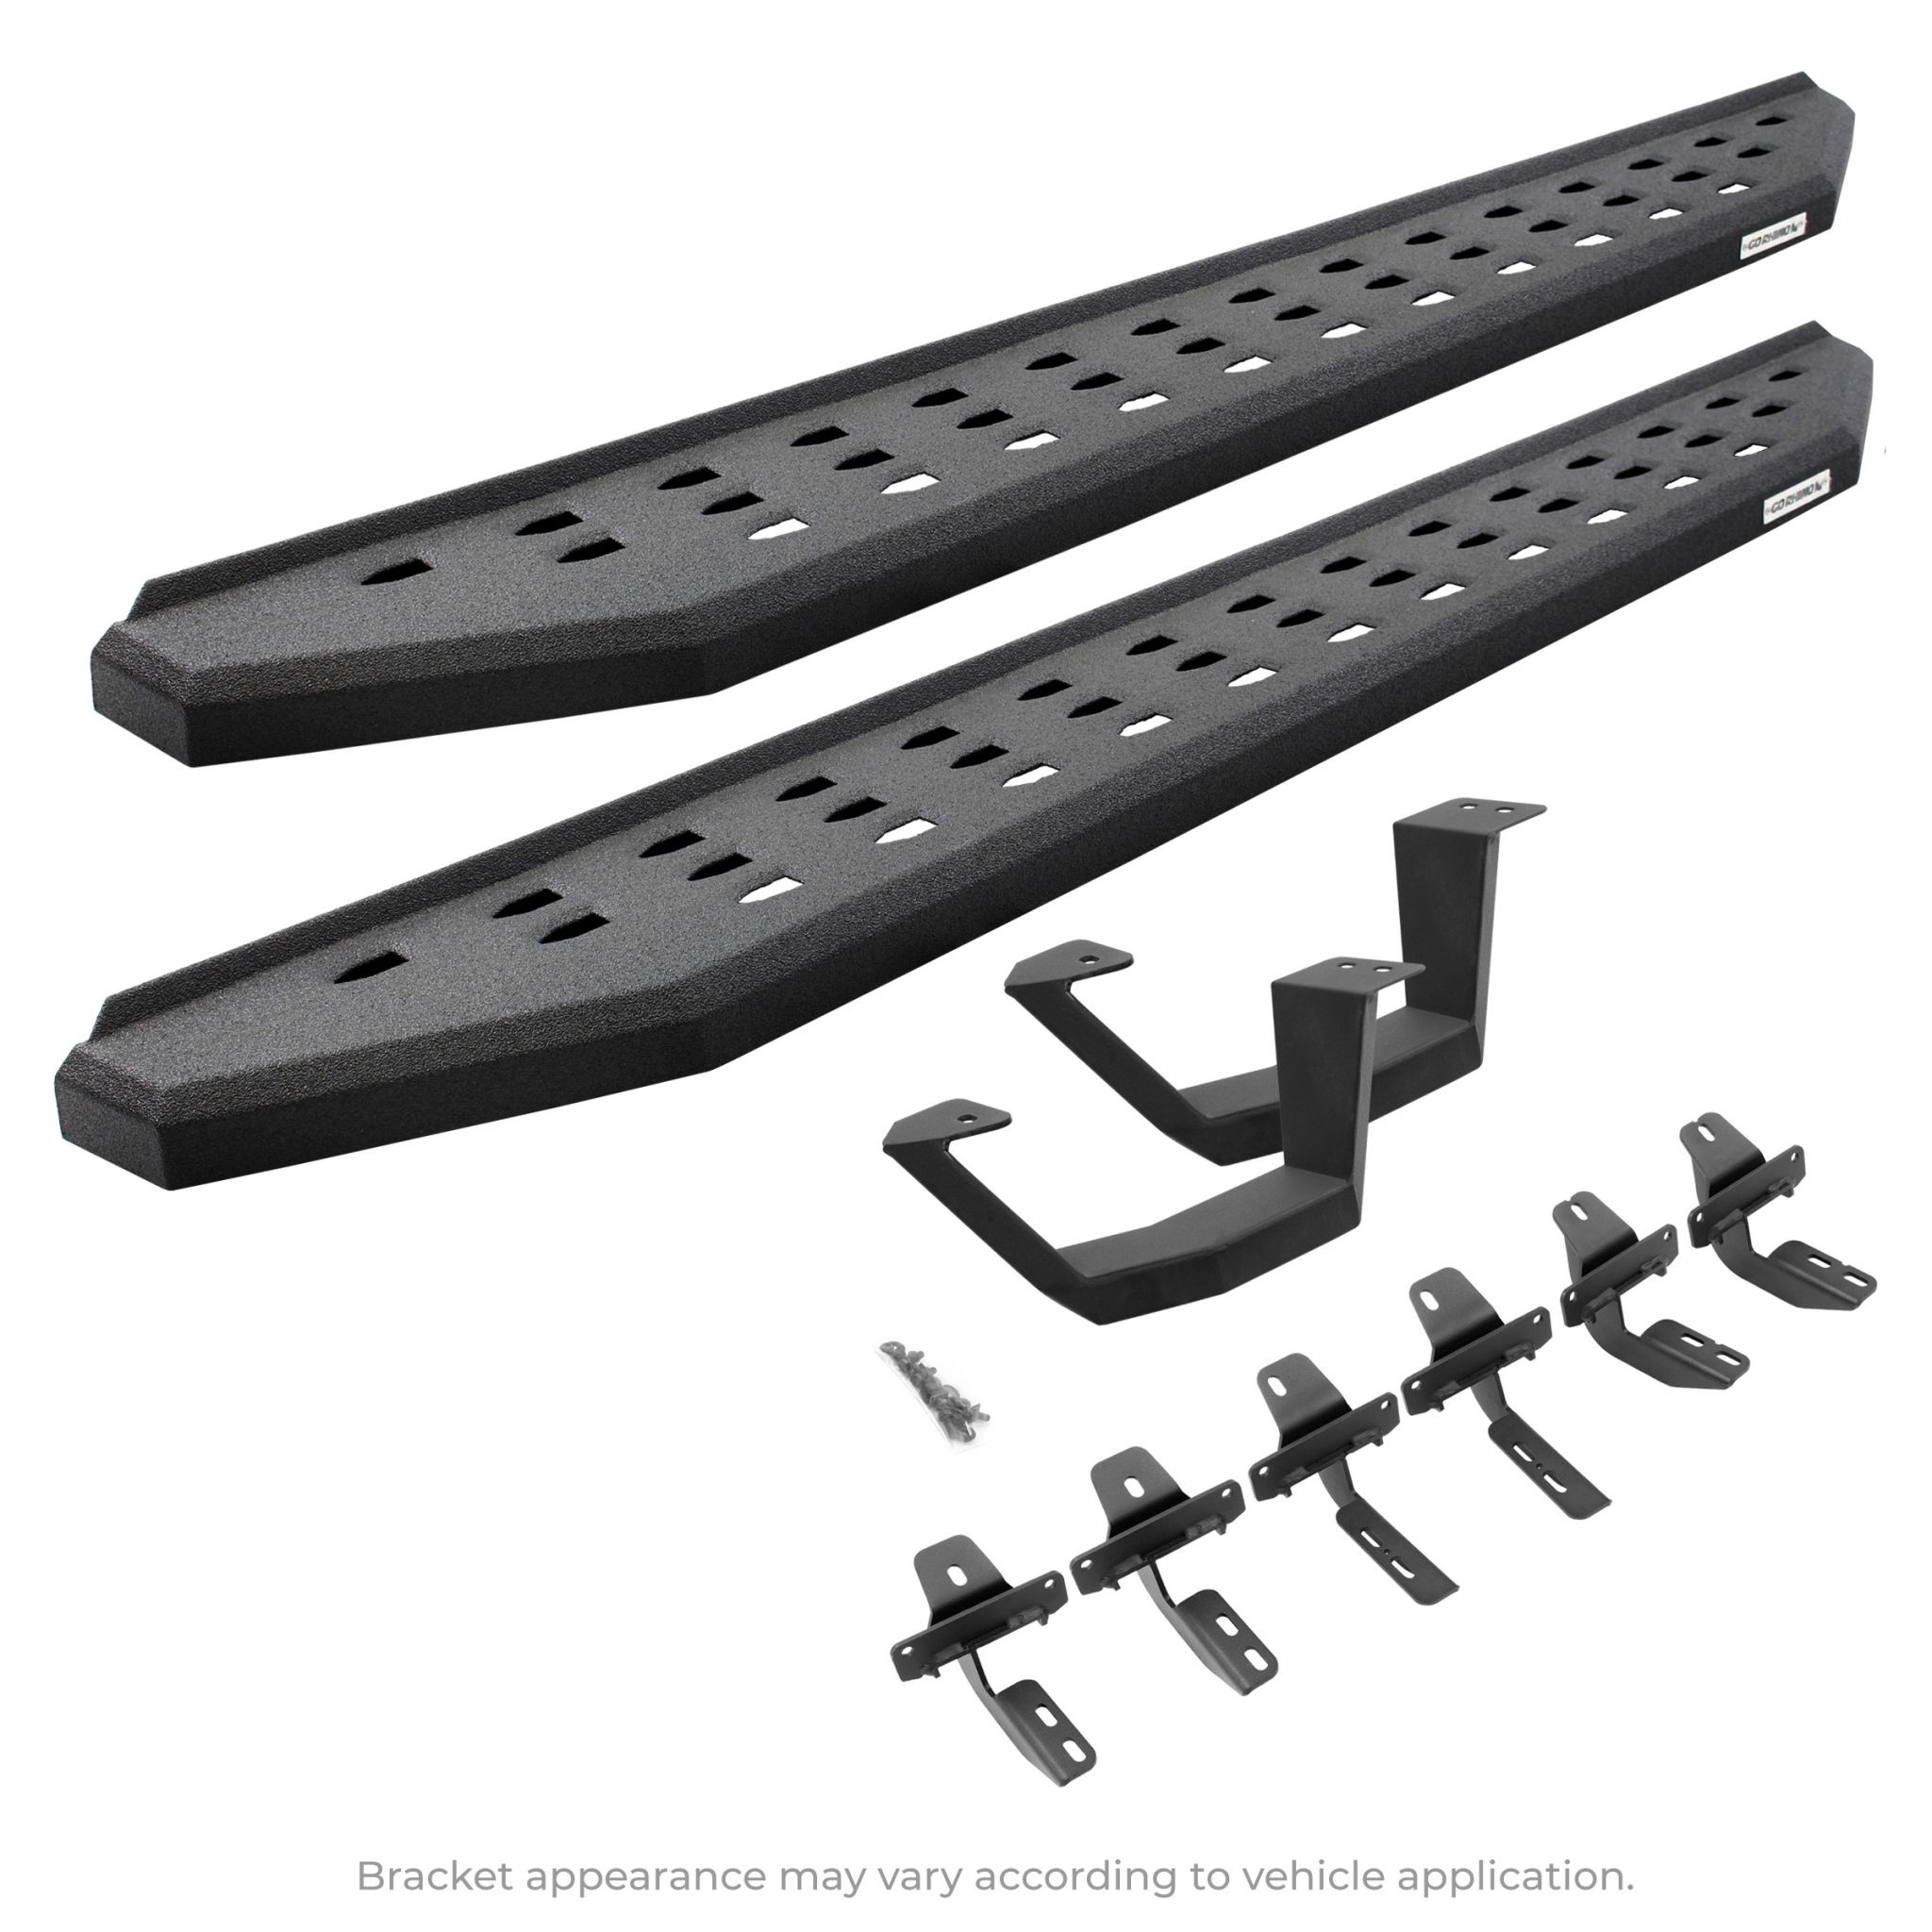 Go Rhino 6949274810T - RB20 Running Boards With Mounting Brackets & 1 Pair of Drop Steps Kit - Protective Bedliner Coating